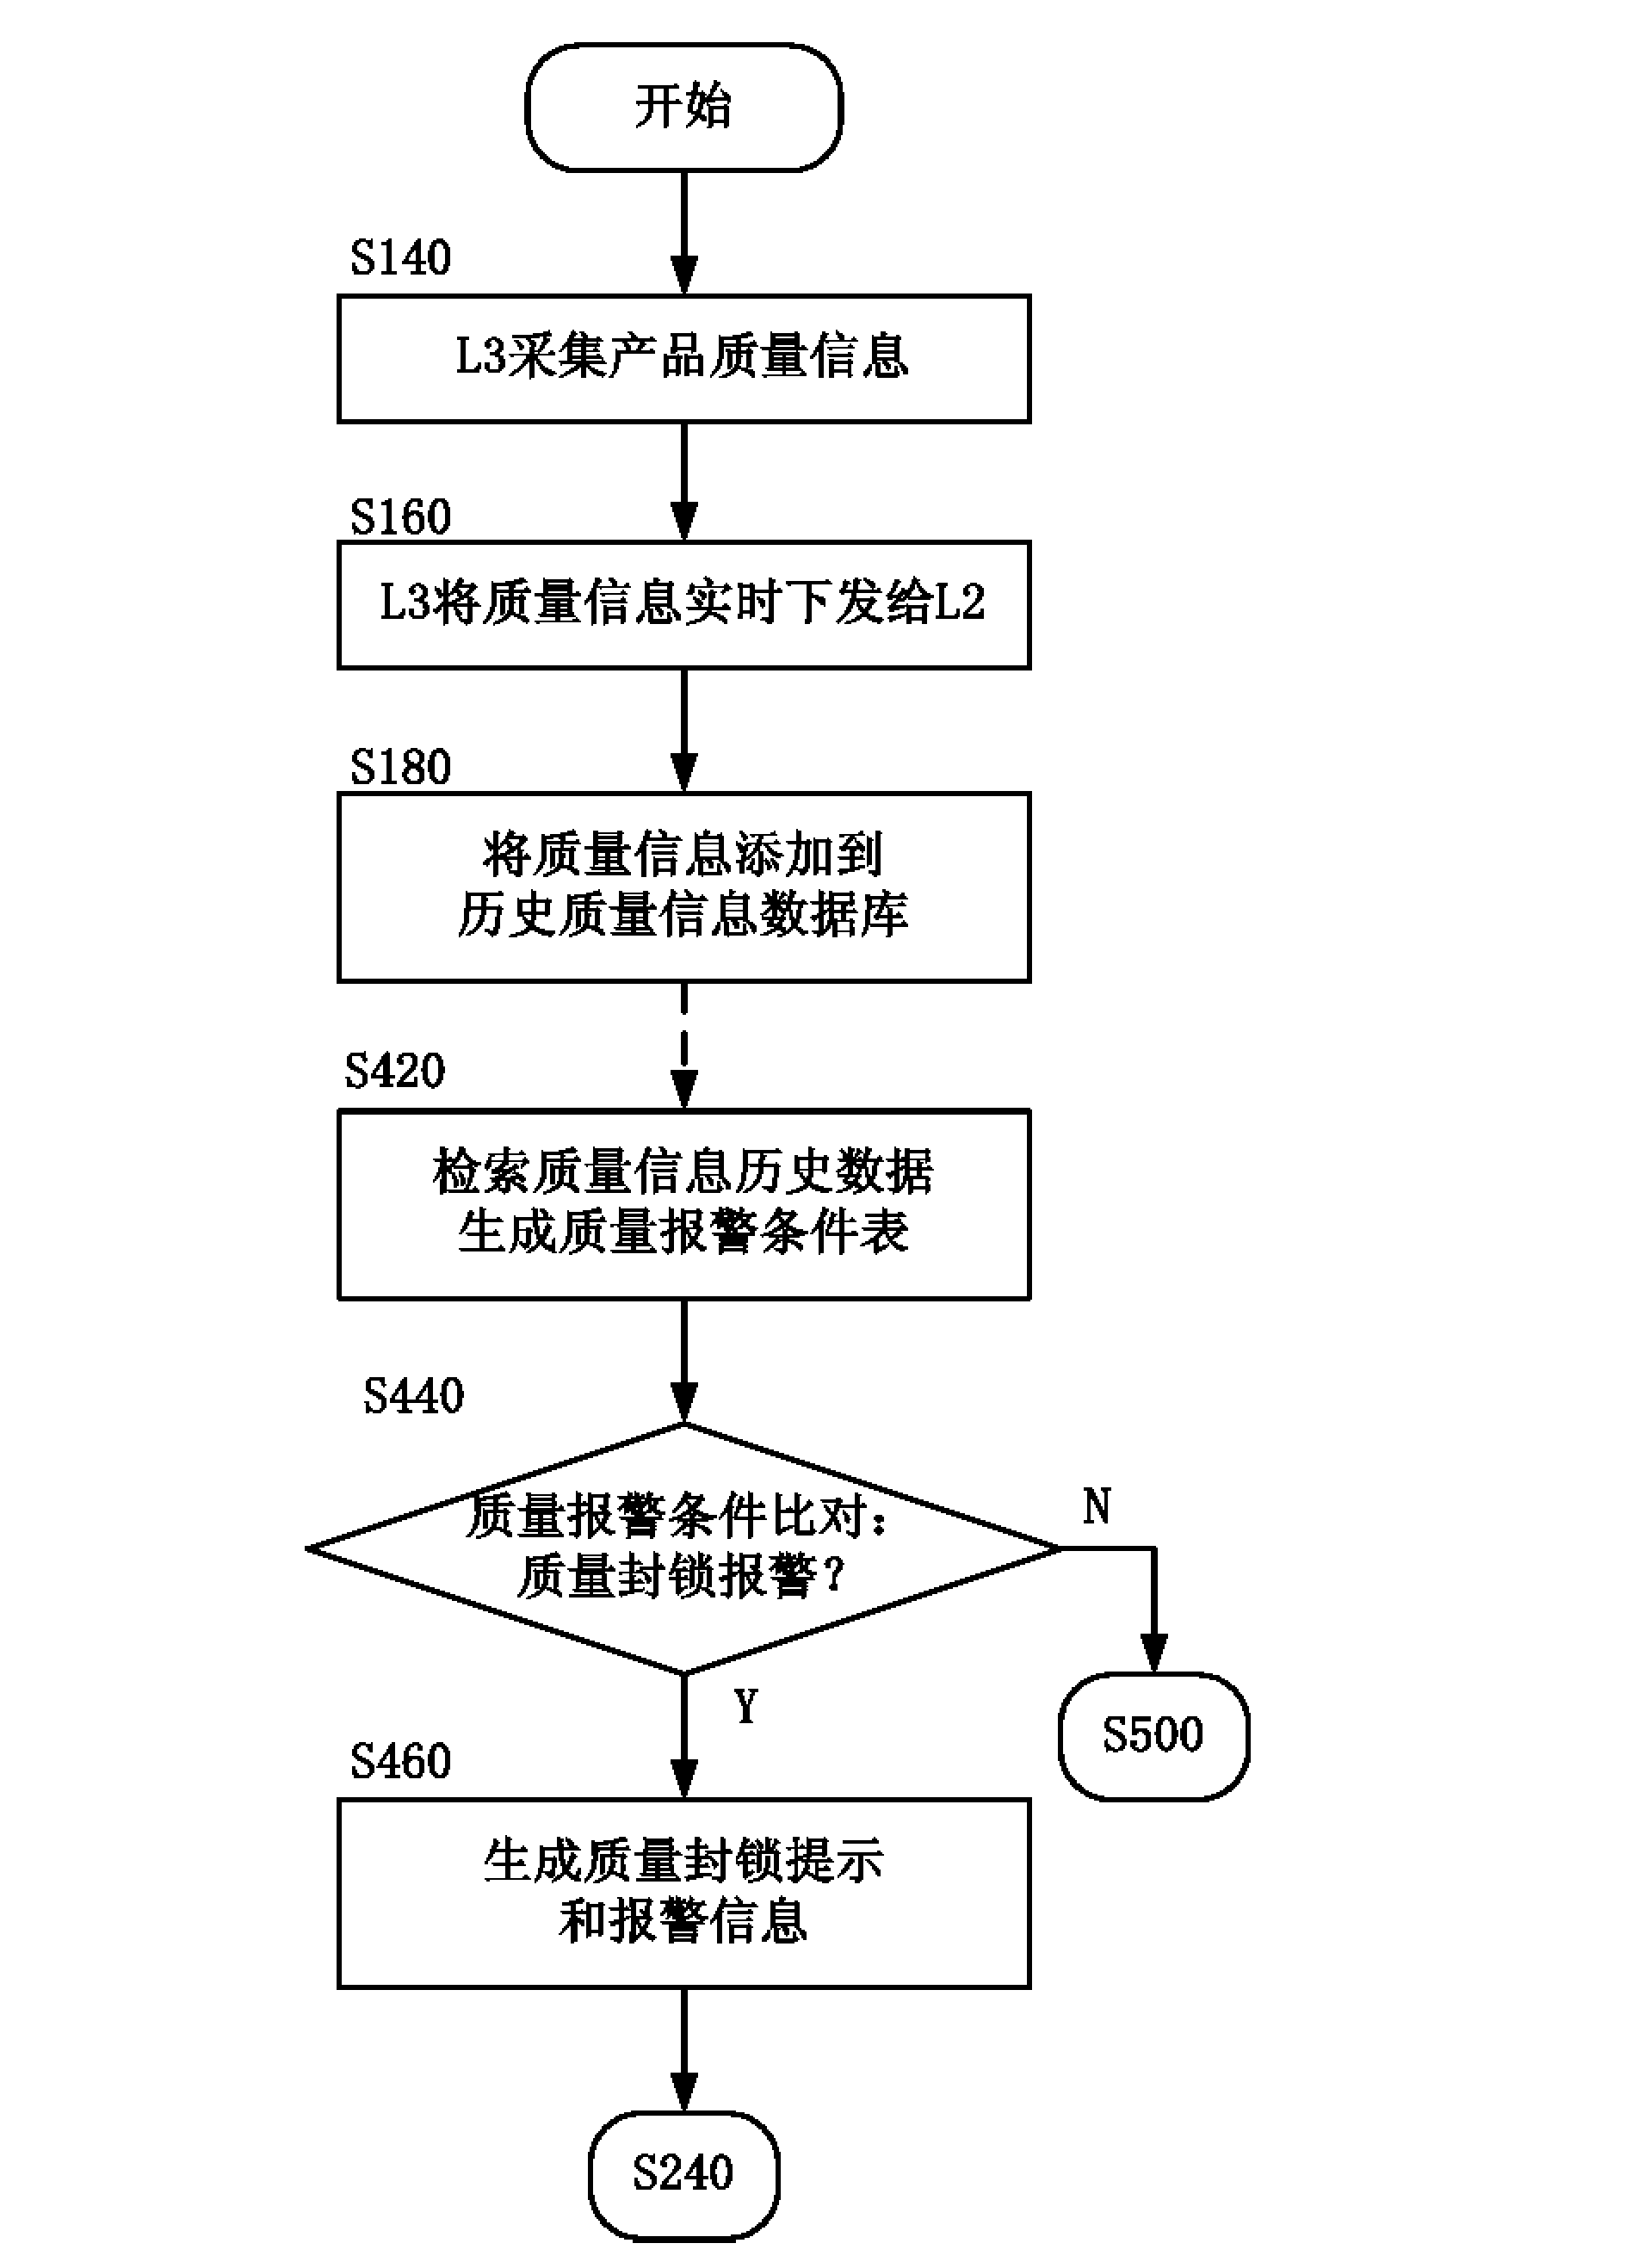 Online rolling plan dynamic pre-analysis and self-adjustment system and method